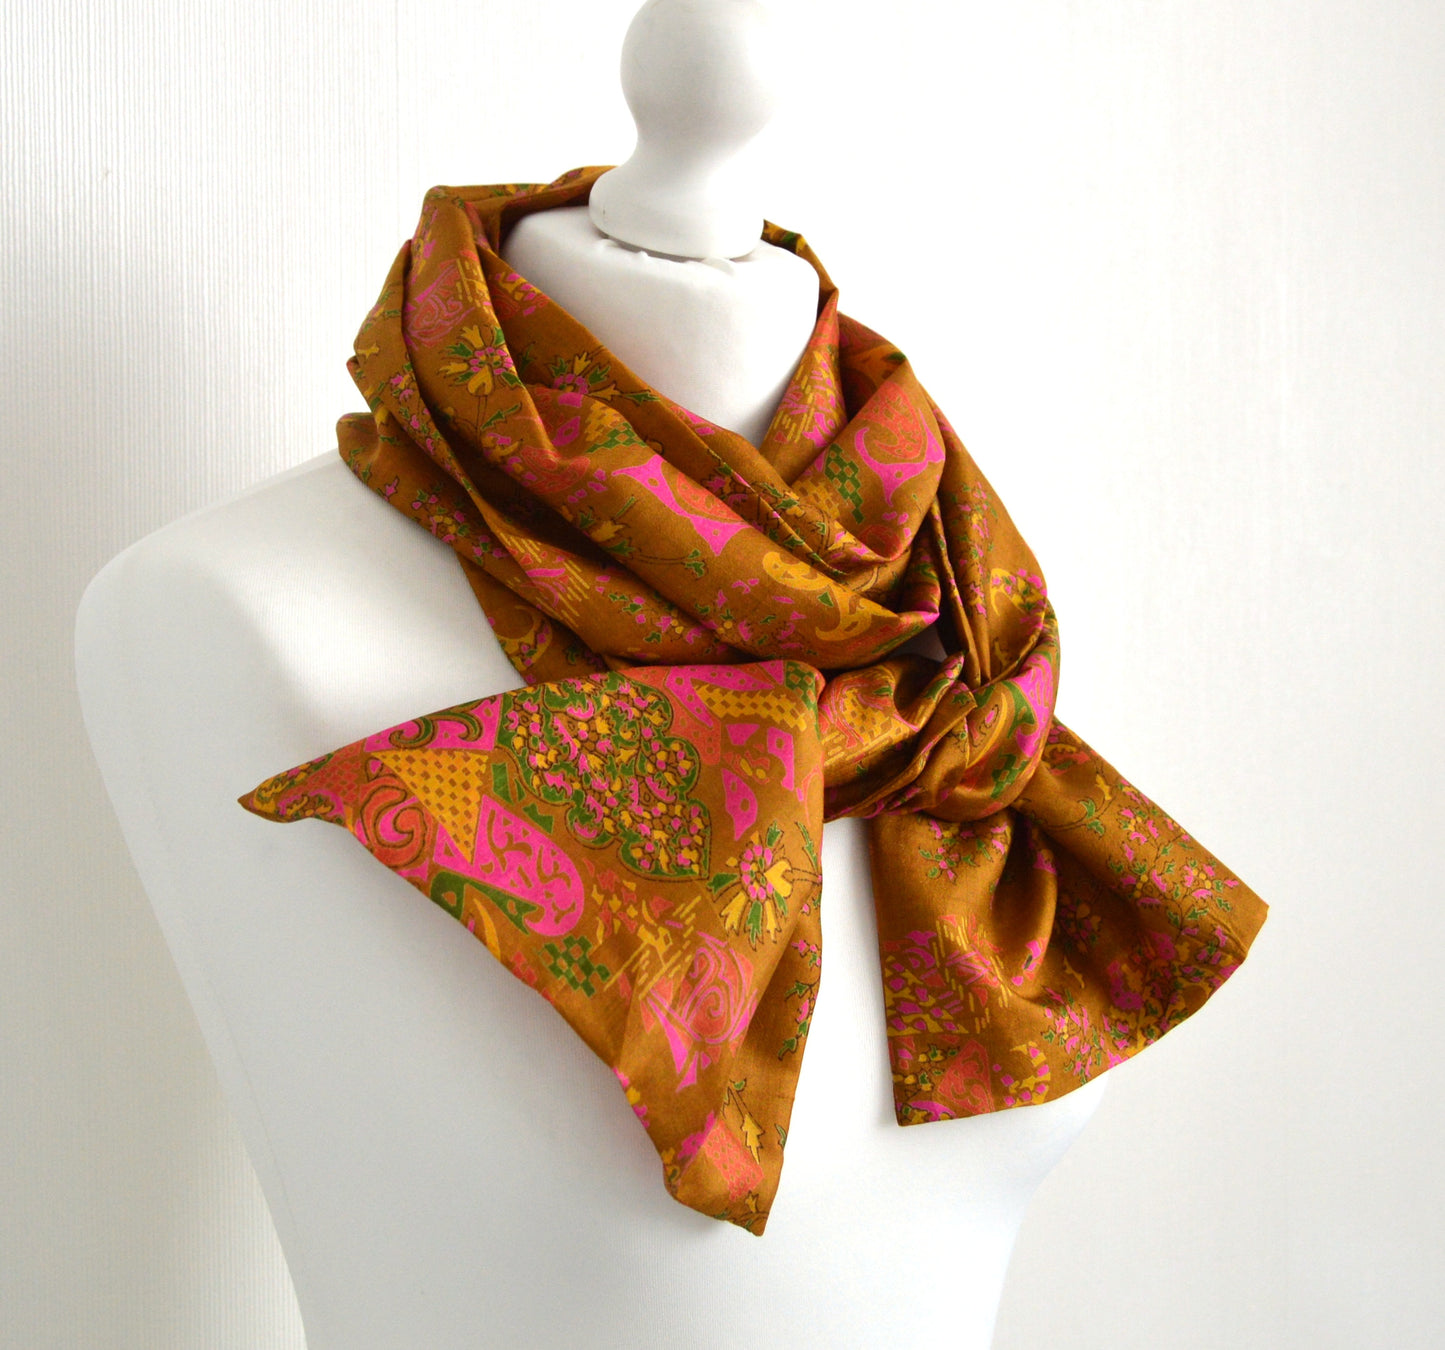 Ochre Cerise Upcycled Vintage Sari Silk Scarf - Sophisticated Boho Mothers Day Gift for Her - Eco Friendly Spring Summer Womens Scarf